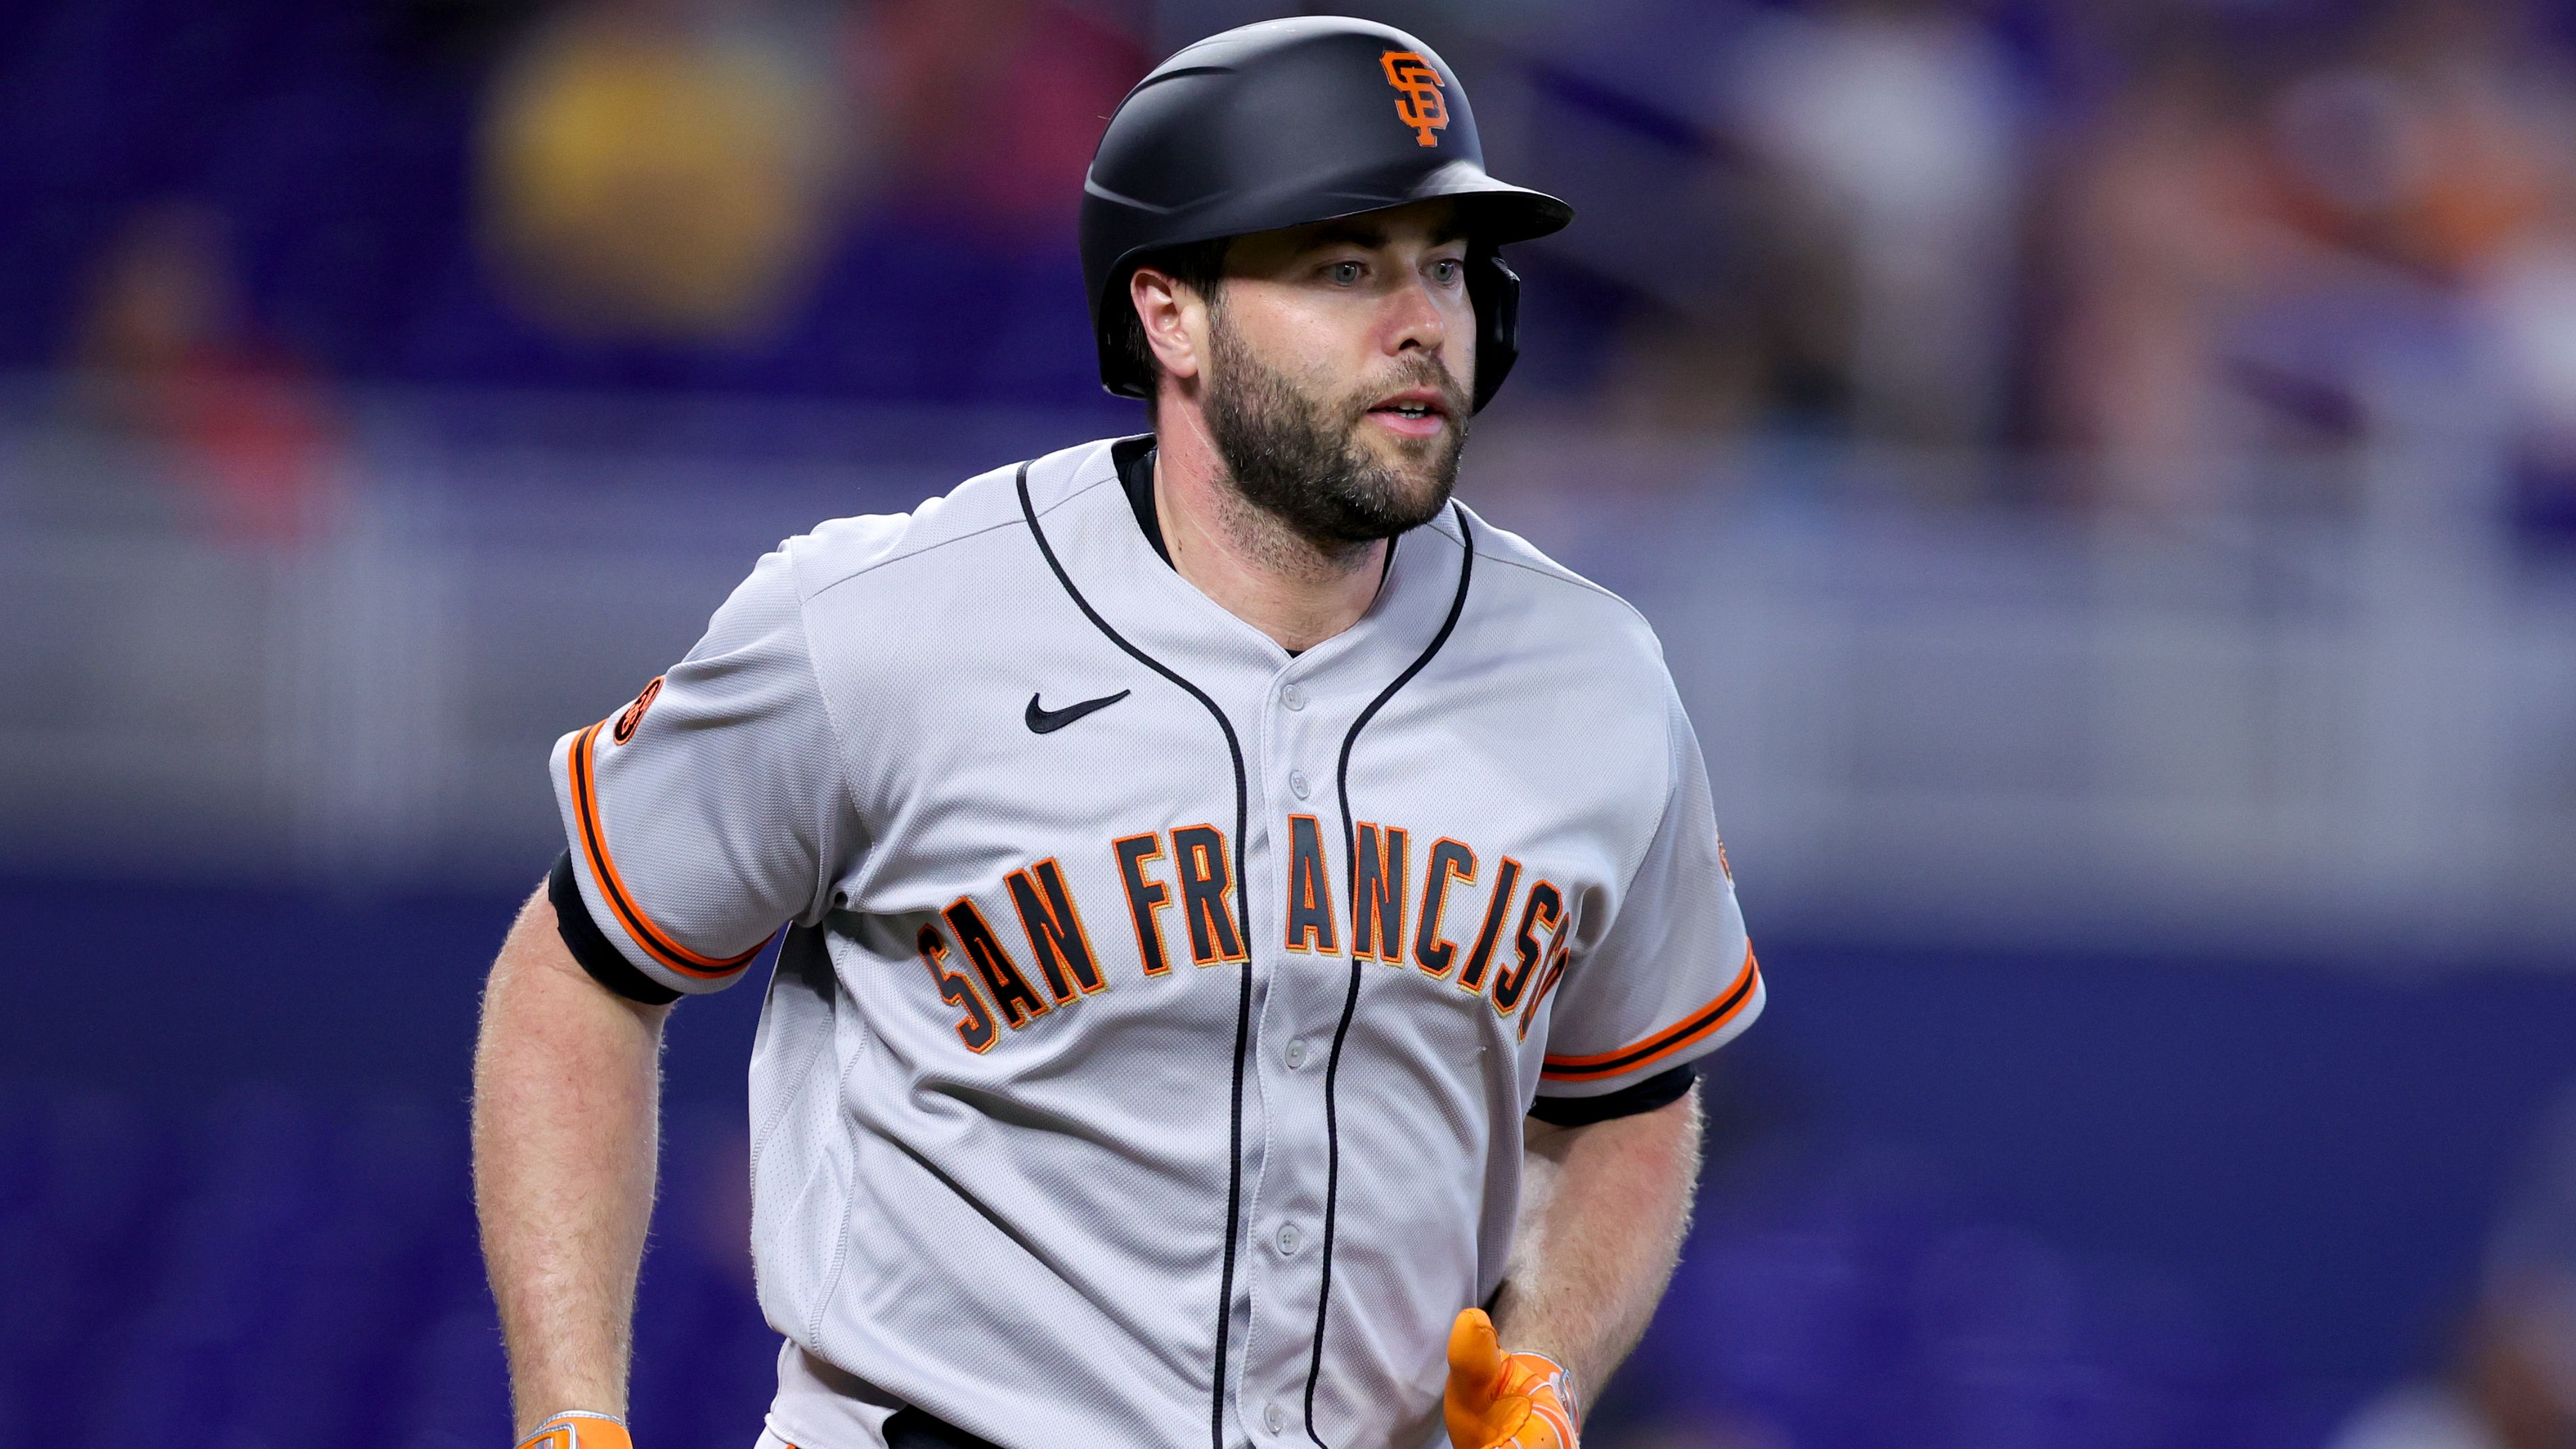 Mets acquire Ruf from Giants